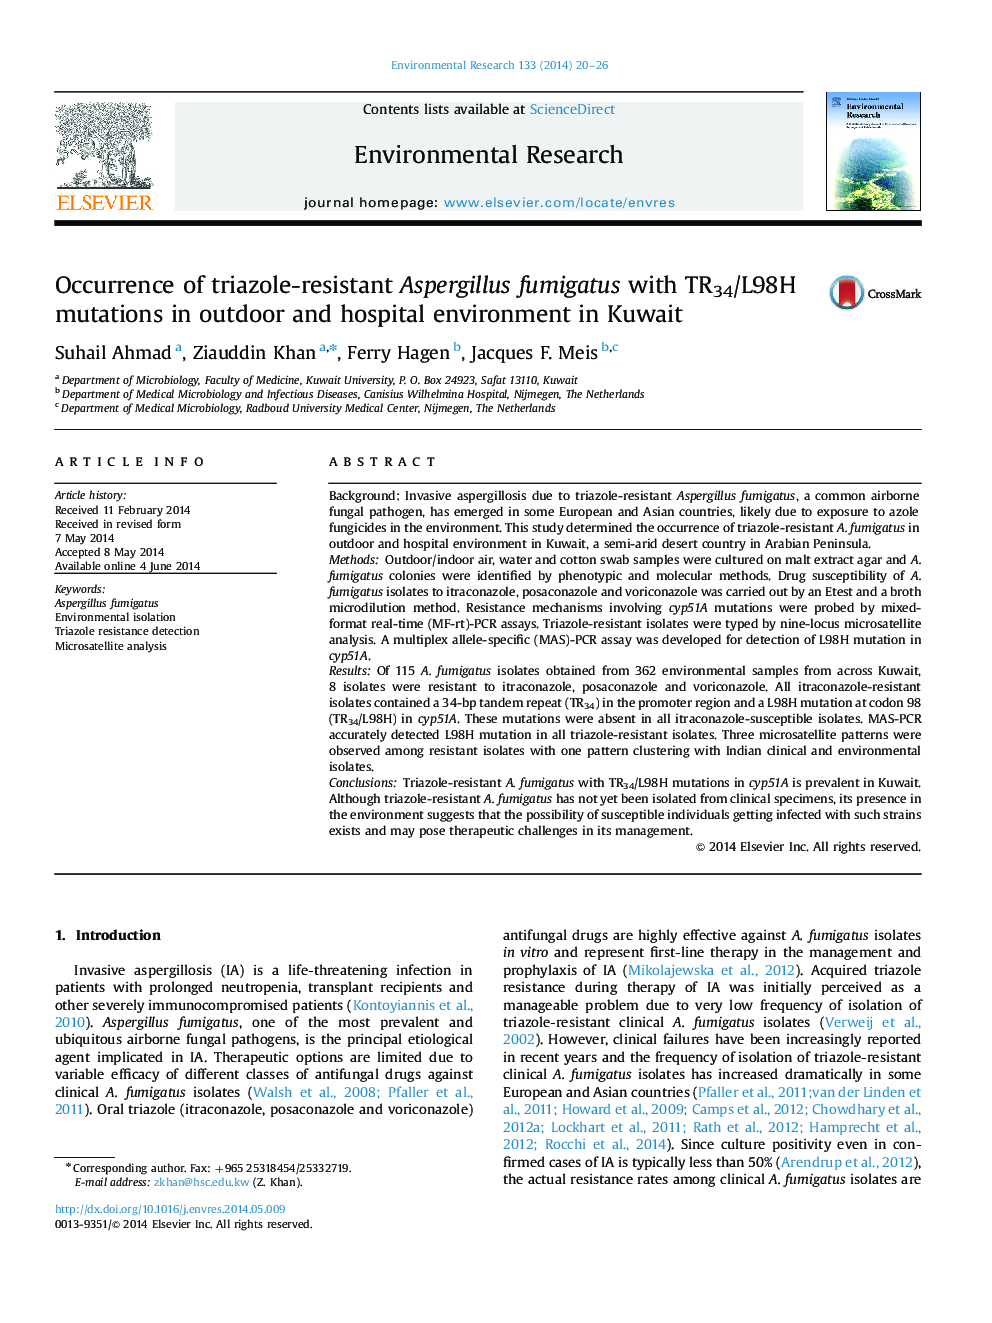 Occurrence of triazole-resistant Aspergillus fumigatus with TR34/L98H mutations in outdoor and hospital environment in Kuwait